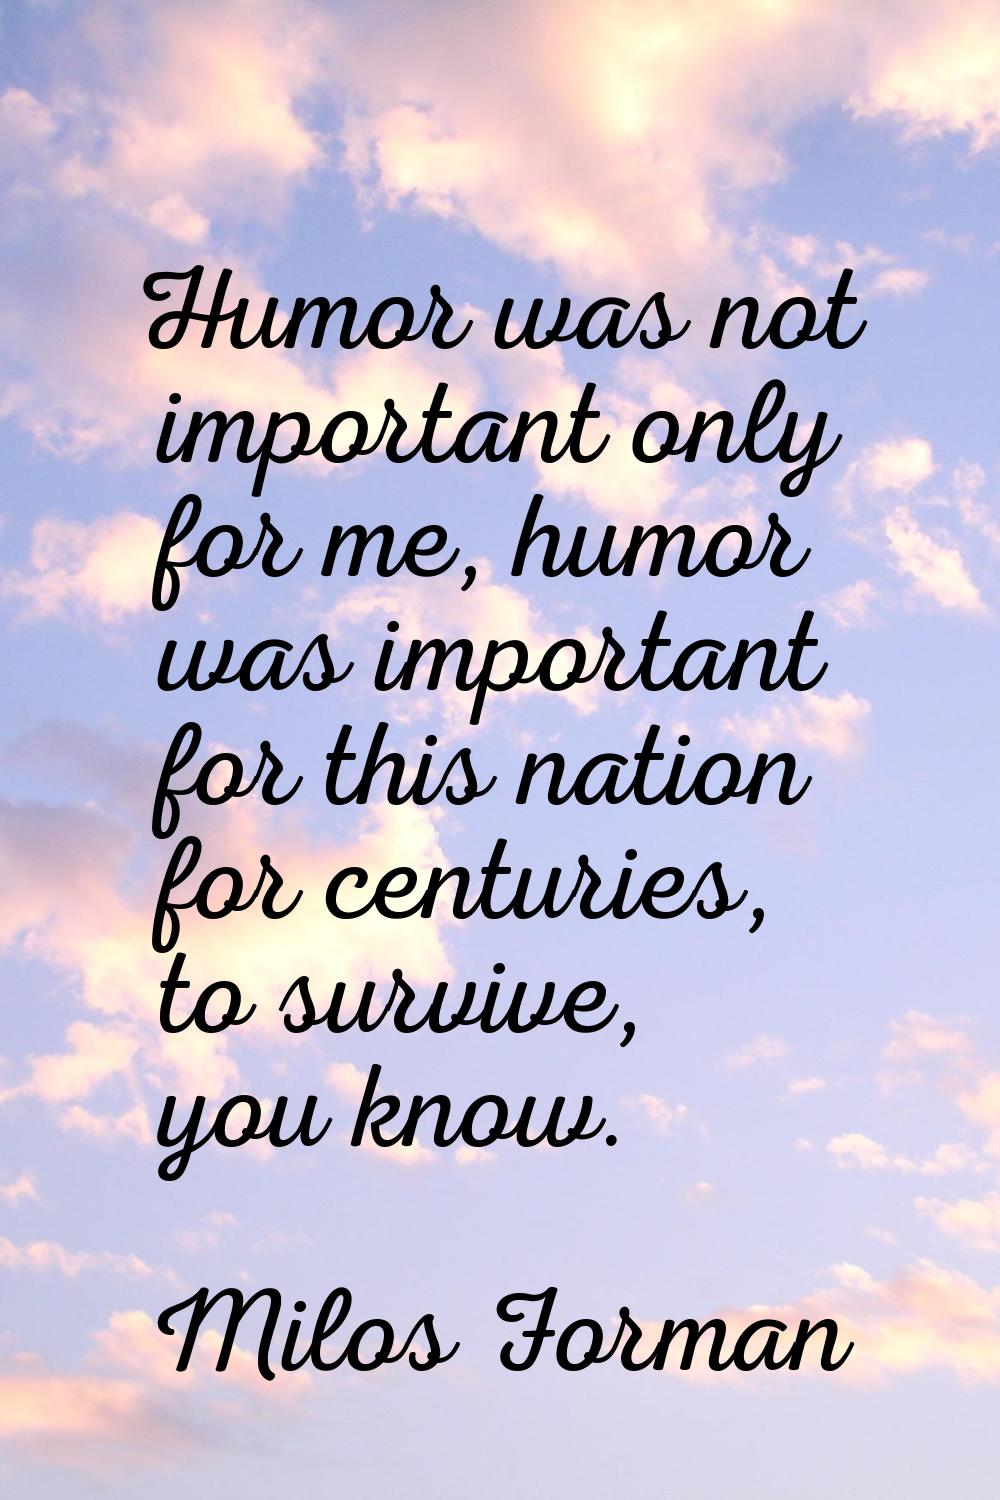 Humor was not important only for me, humor was important for this nation for centuries, to survive,